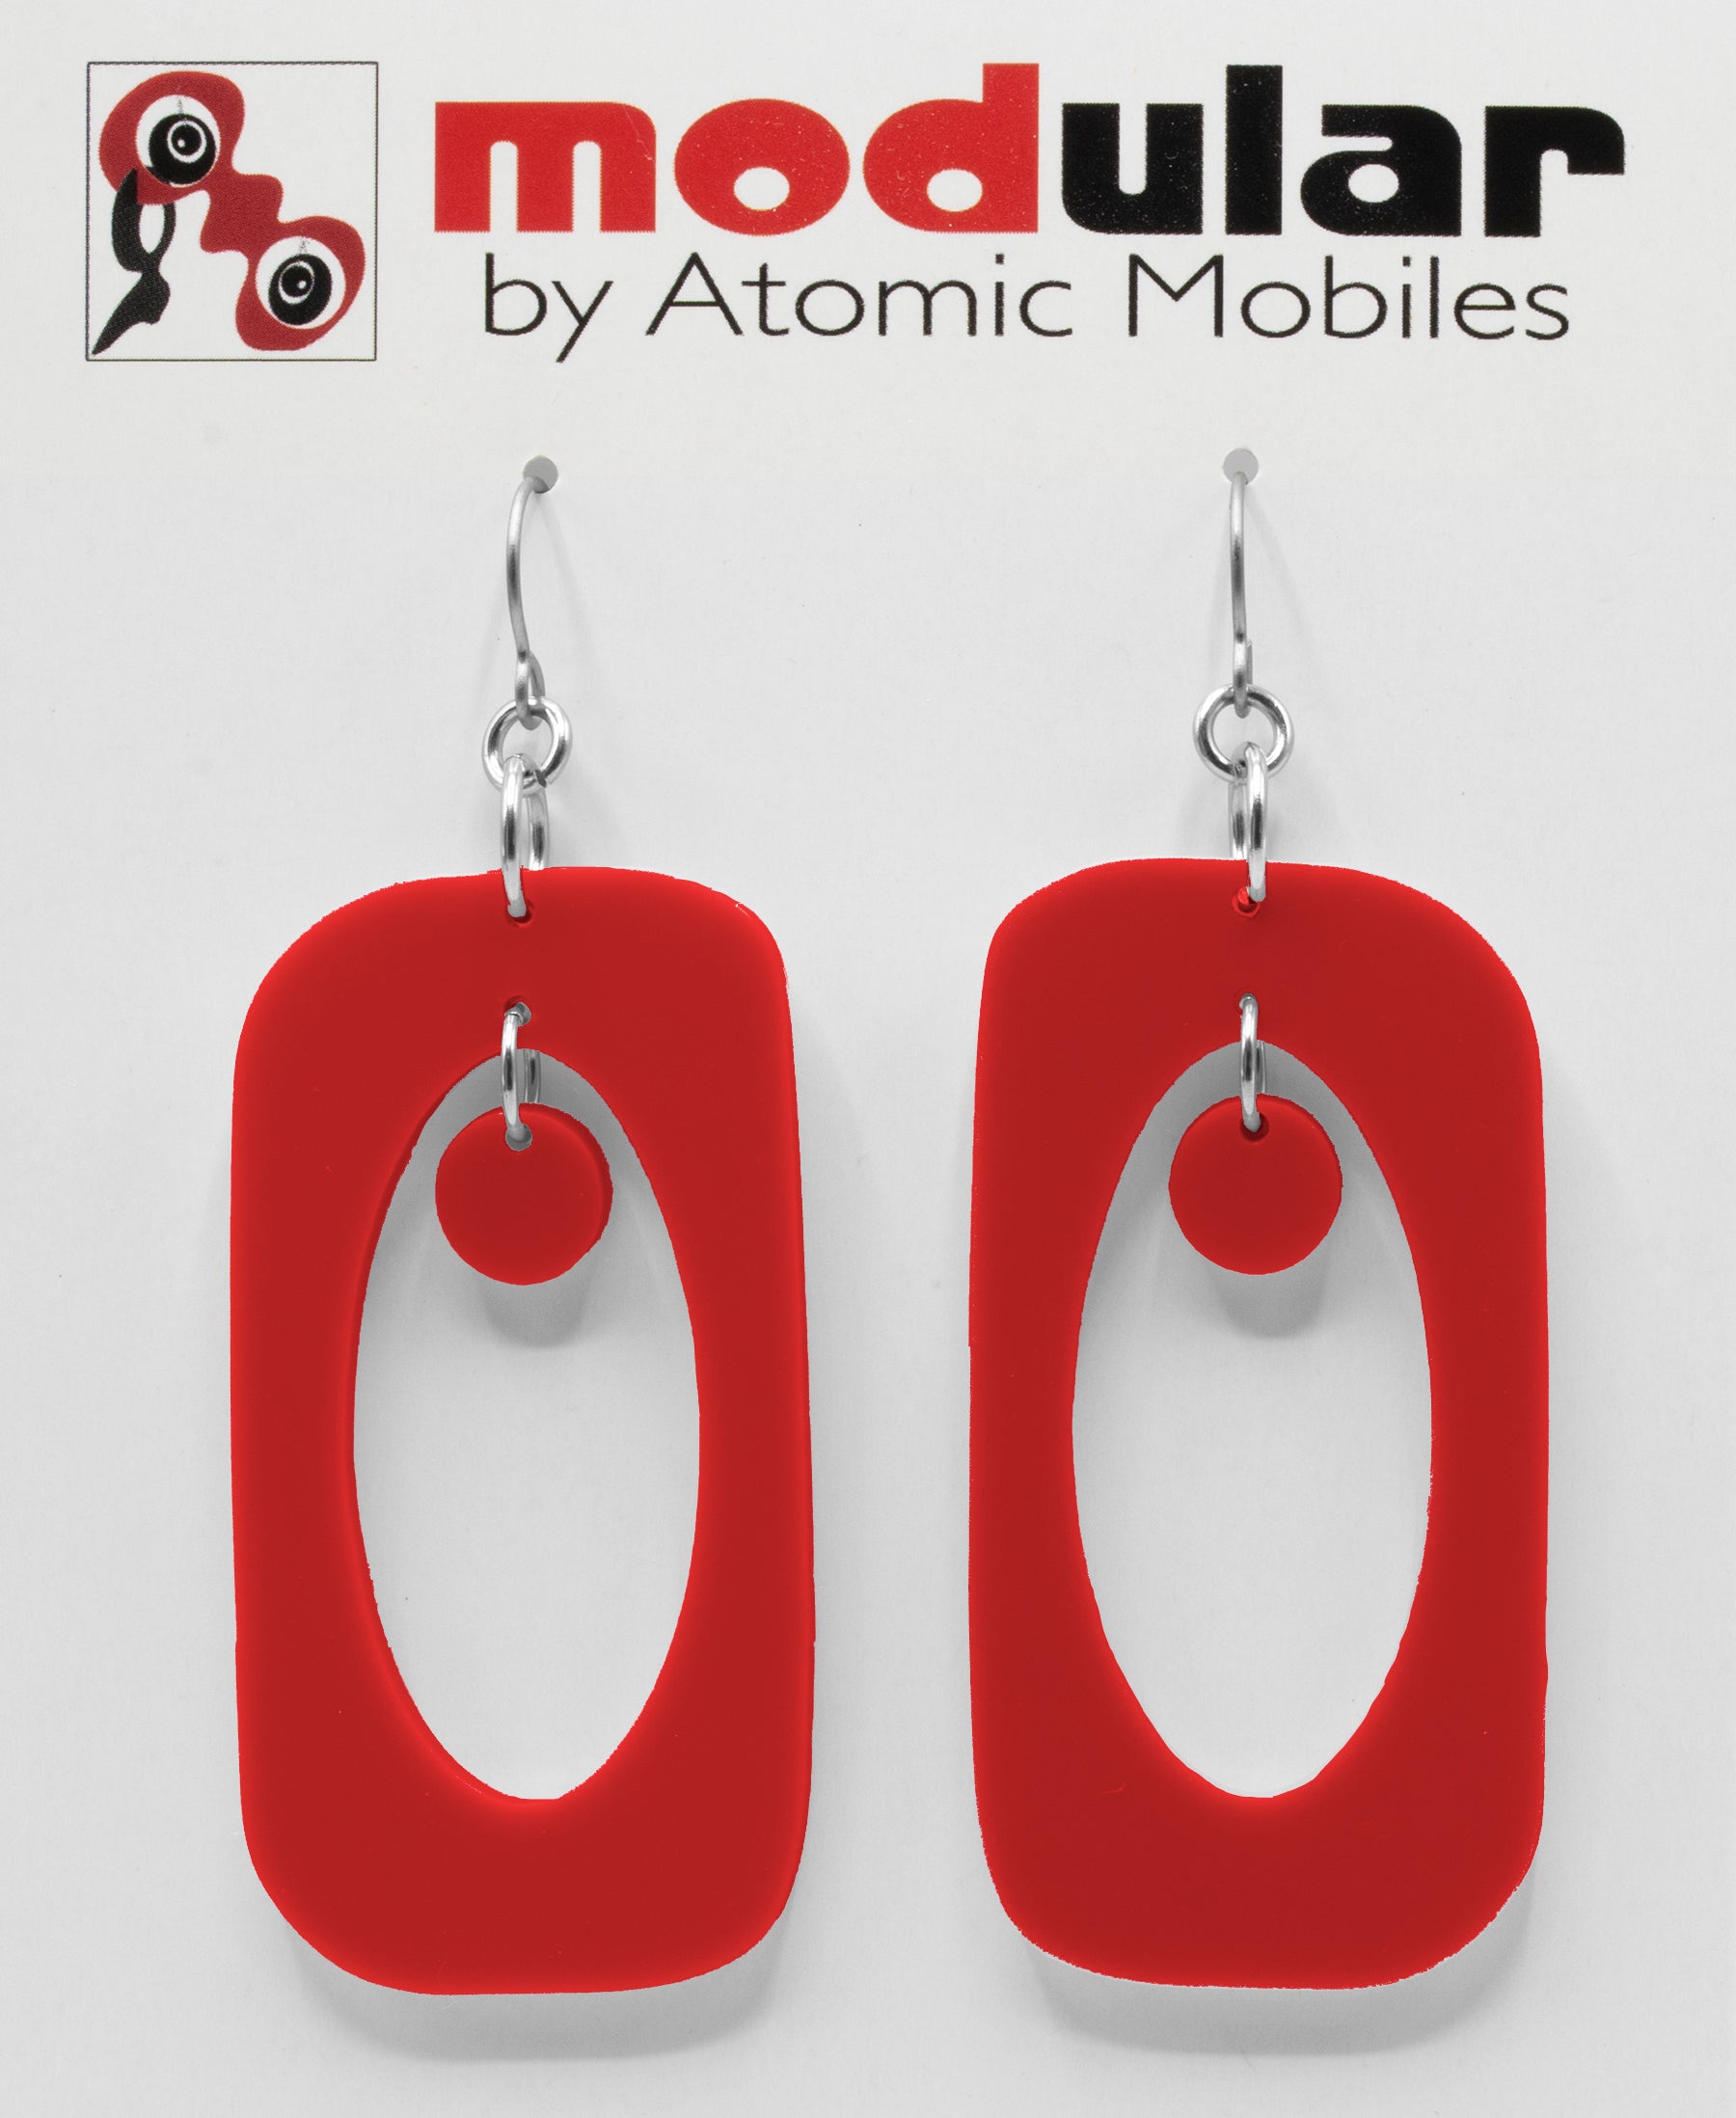 Beatnik Boho Atomic Earrings in Red by AtomicMobiles.com in Ravishing Red - mod retro midcentury inspired jewelry